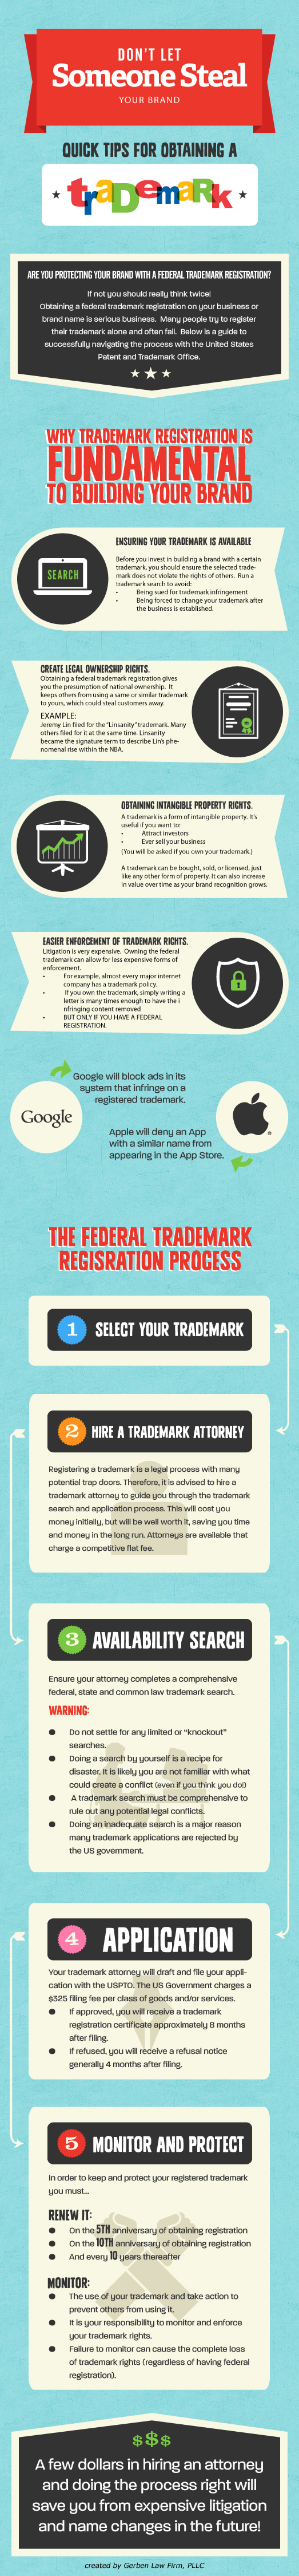 Quick Tips for Obtaining a Trademark